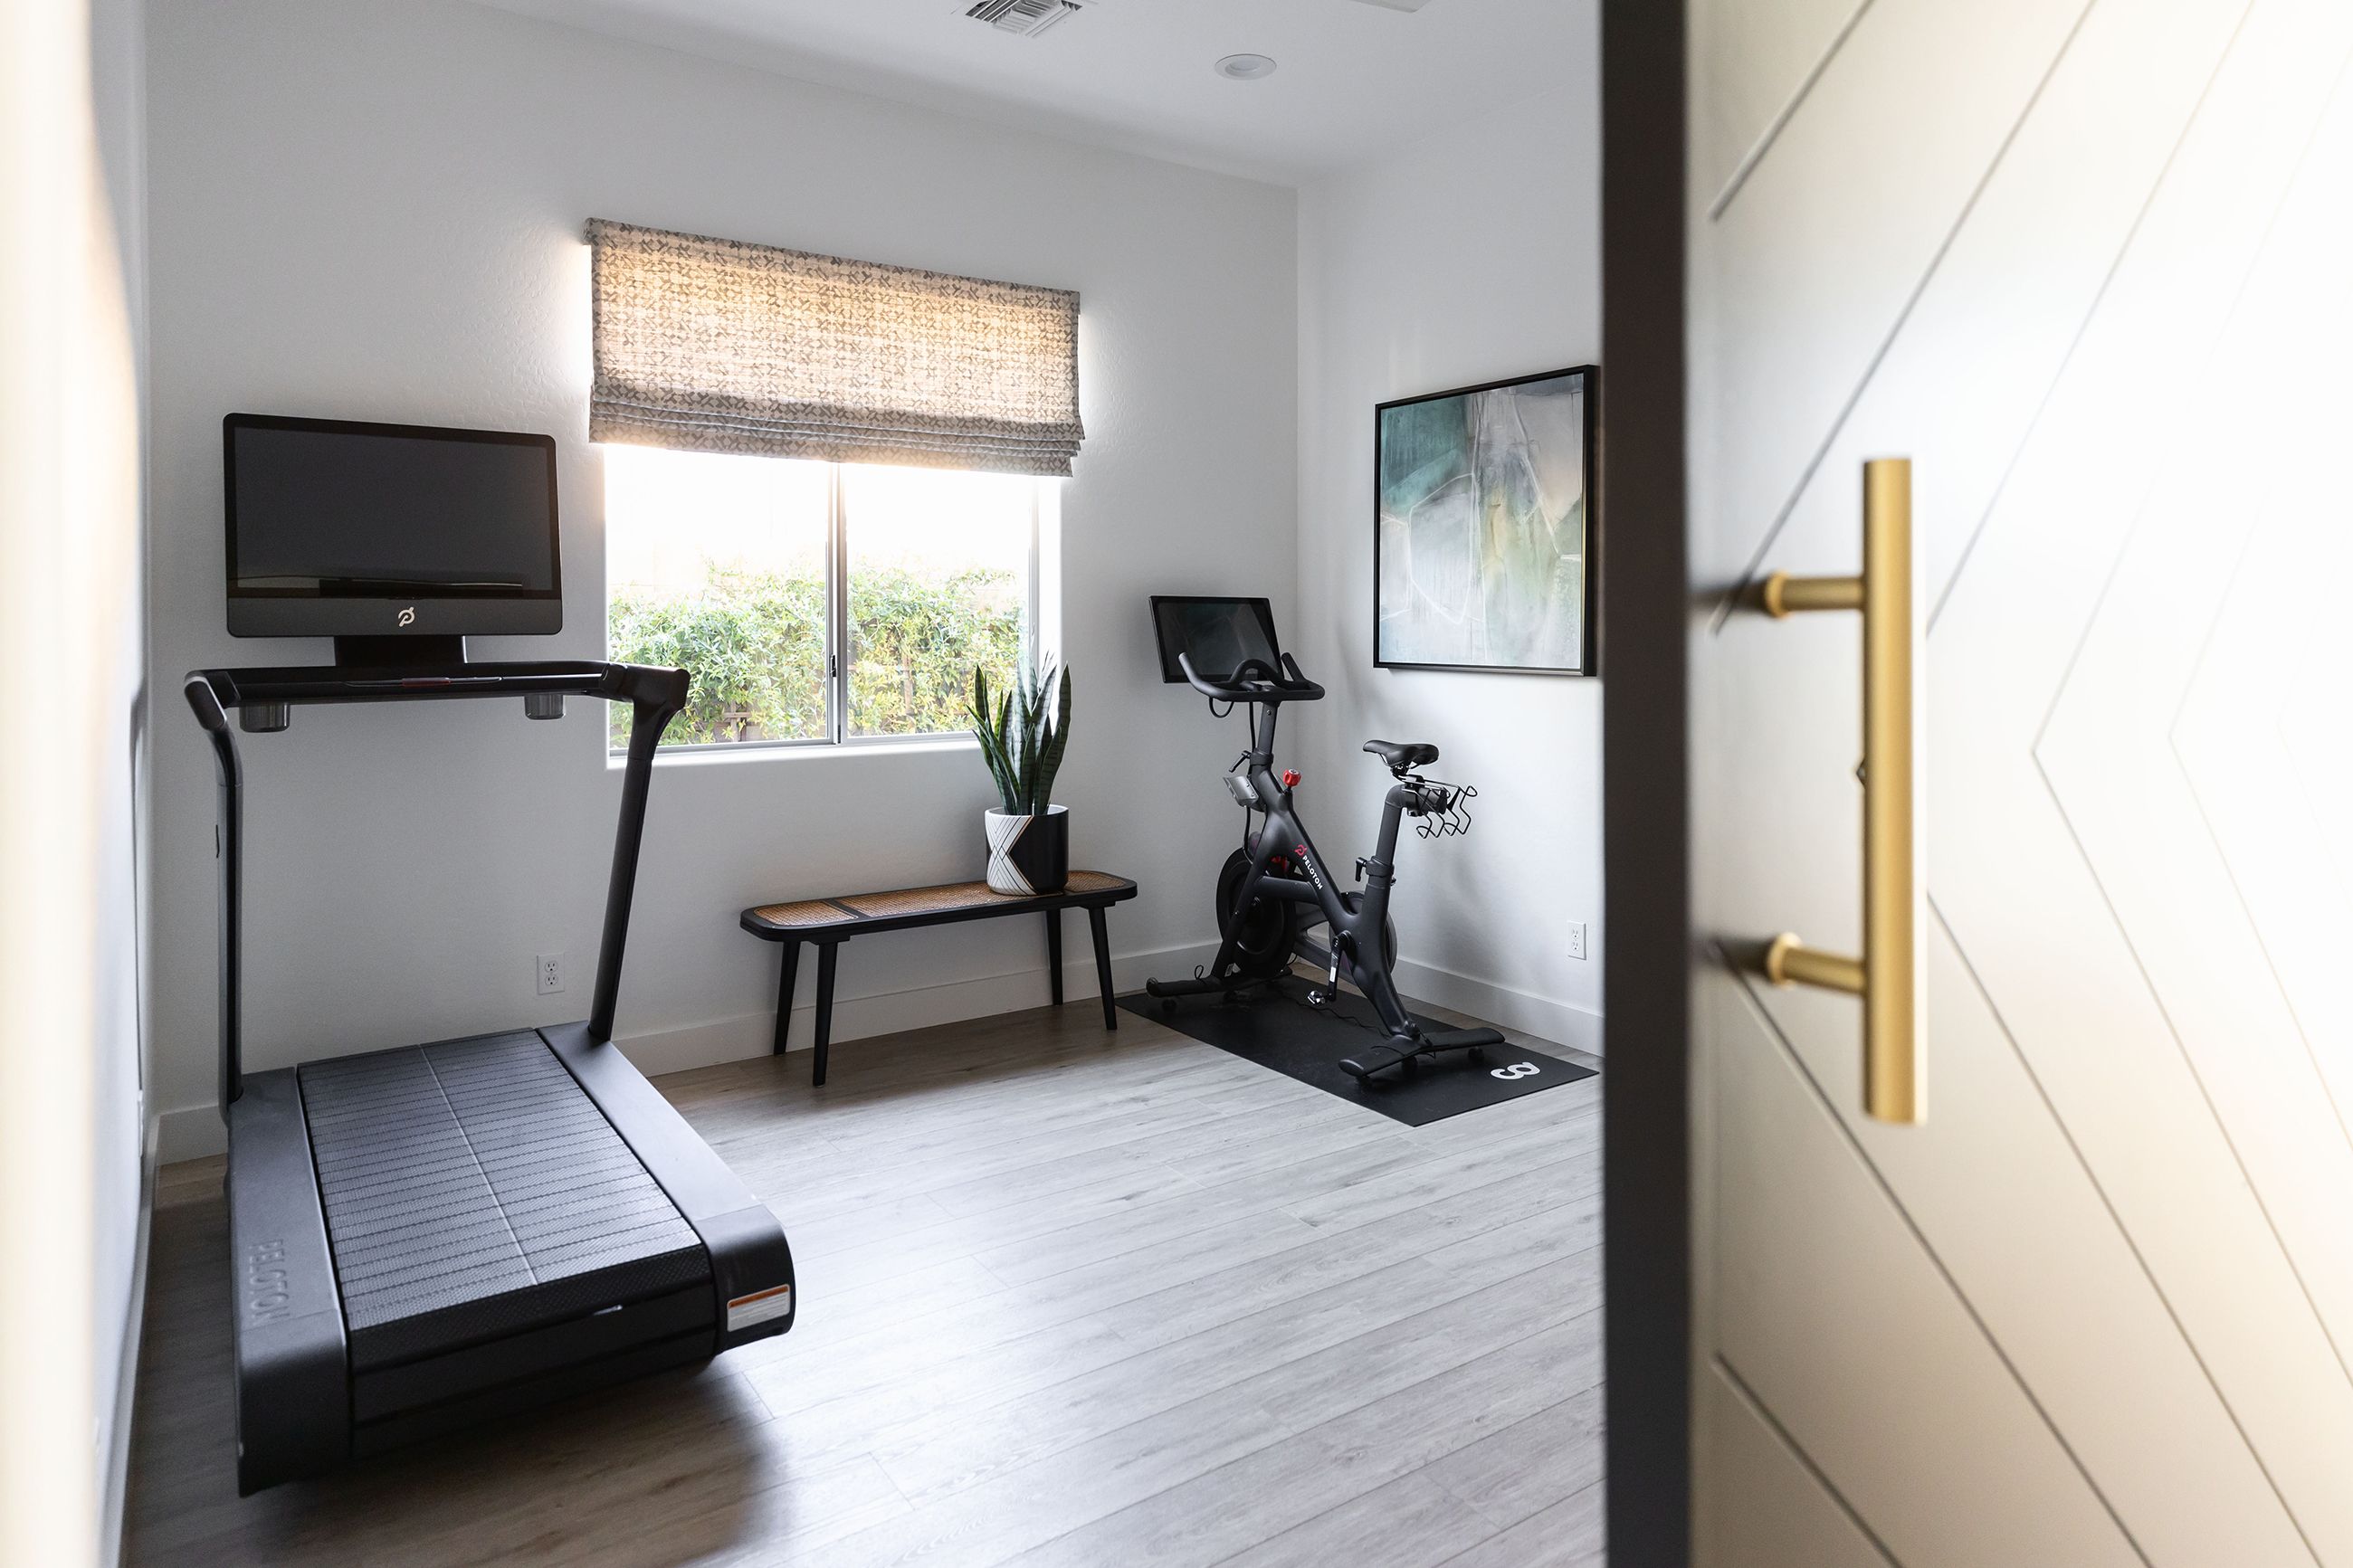 10 Small Home Gym Ideas That Work in Any Space